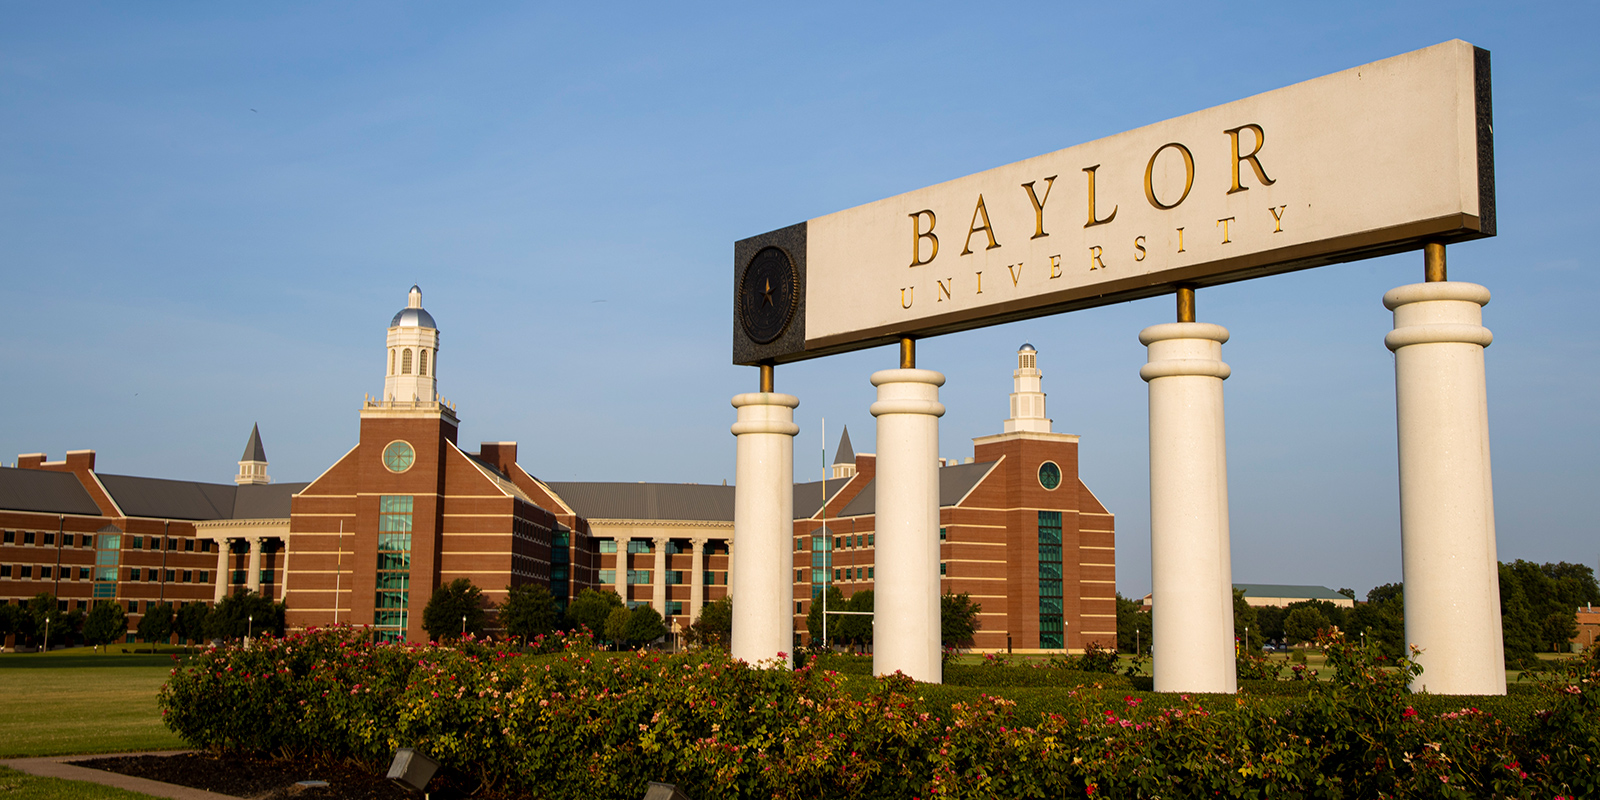 What Is Baylor University Known For? Ranking & Acceptance Rate